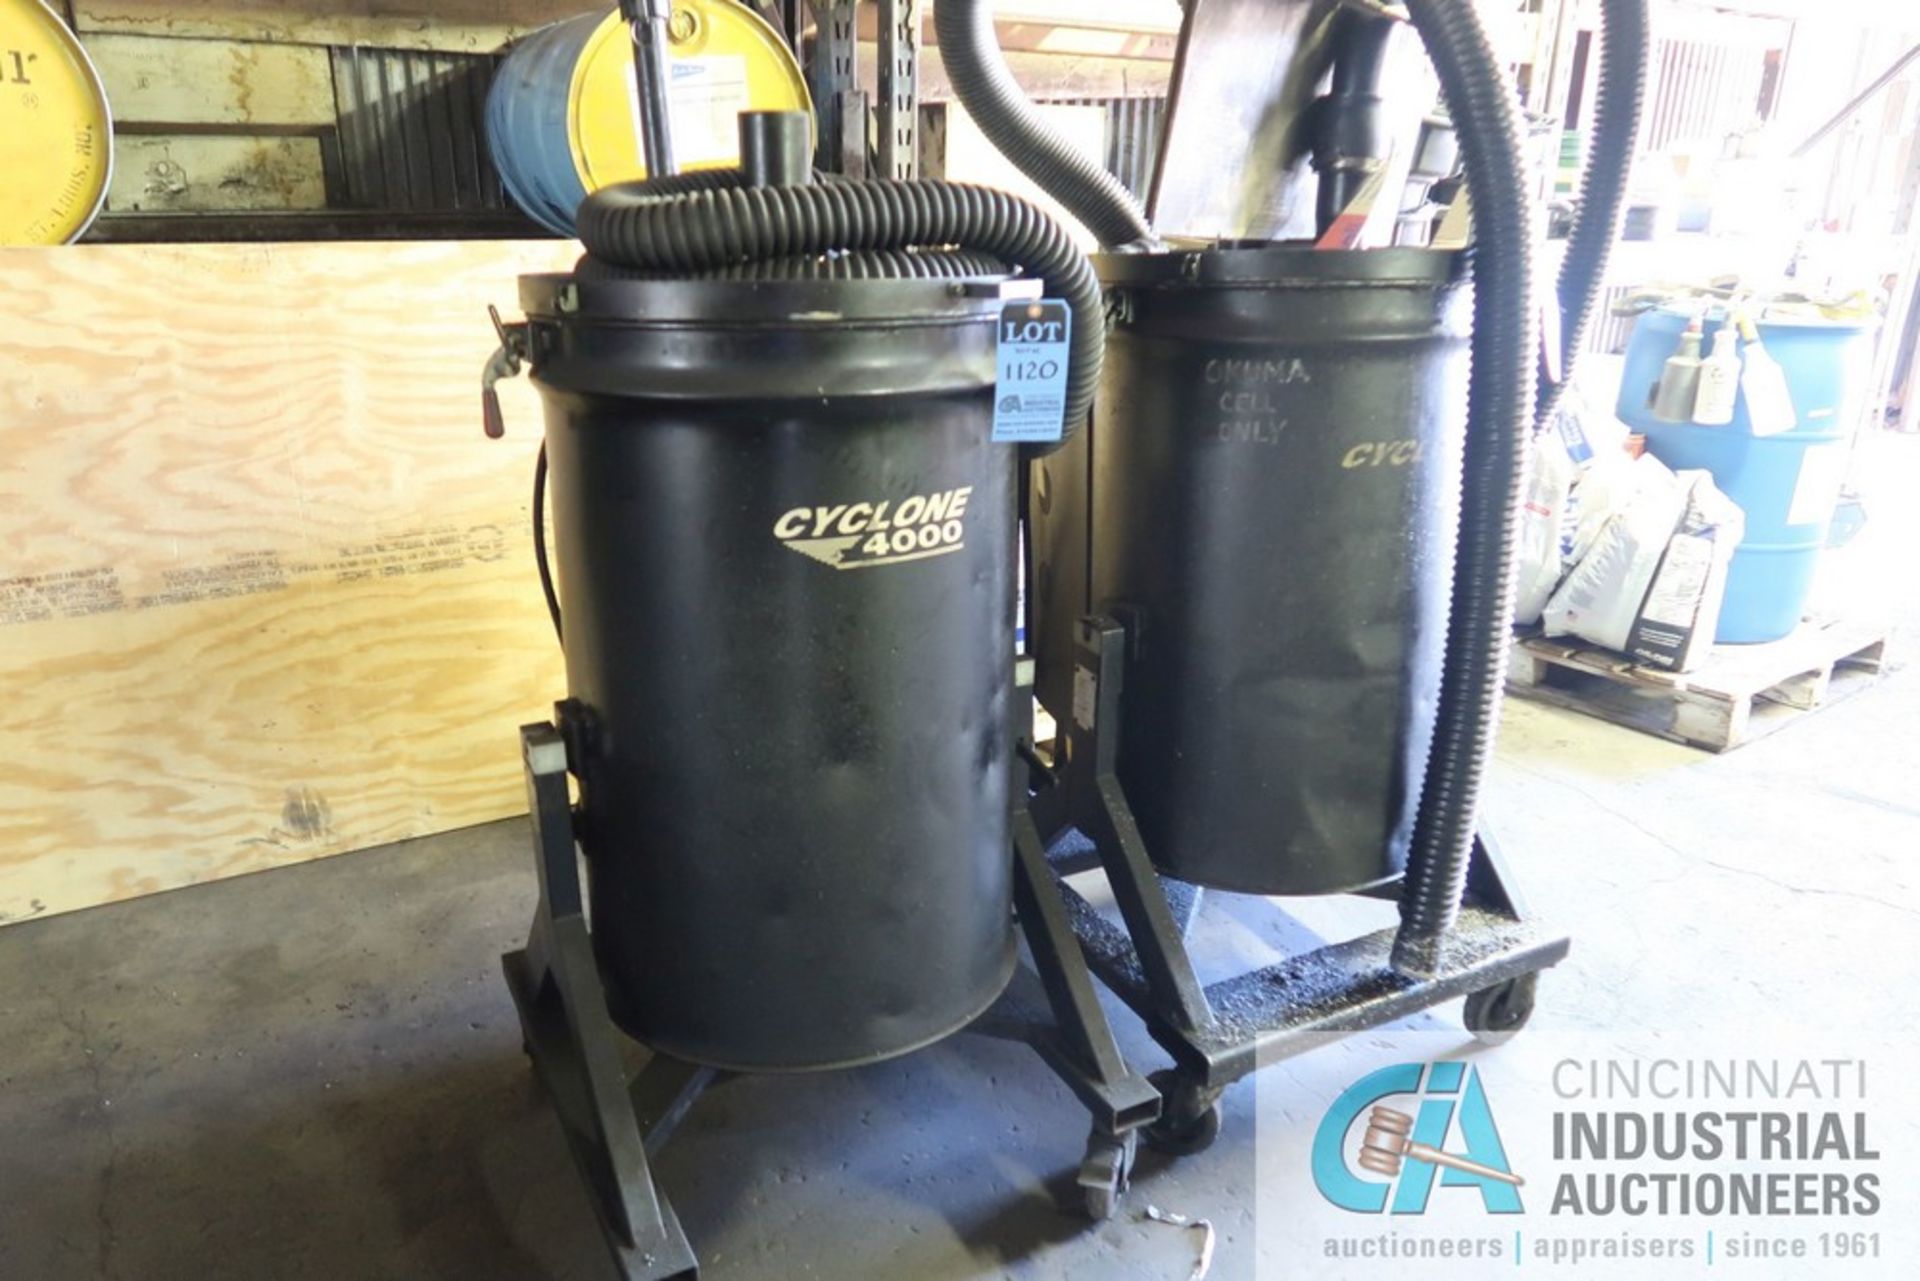 CYCLONE PORTABLE OIL RECOVERY PUMPS (CYCLONE 4000 - OUT OF SERVICE) - Image 2 of 2